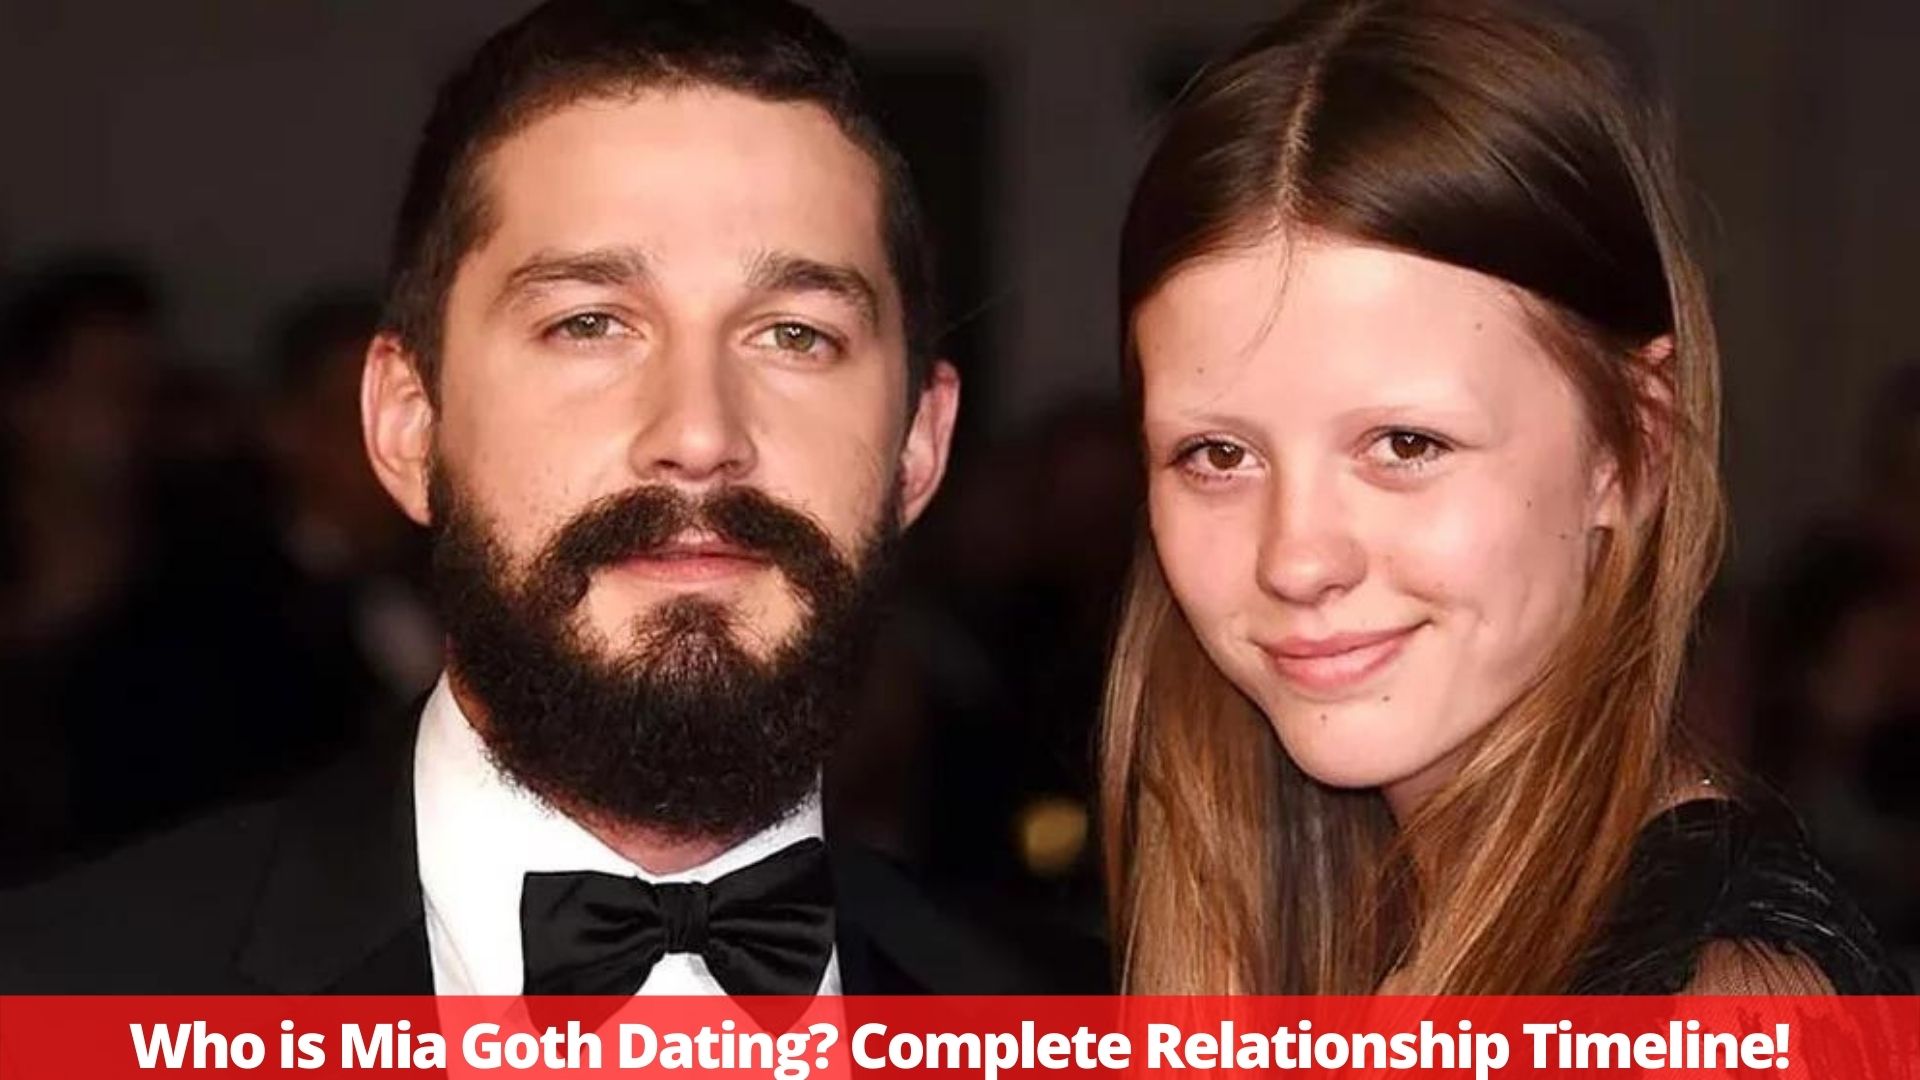 Who is Mia Goth Dating? Complete Relationship Timeline!